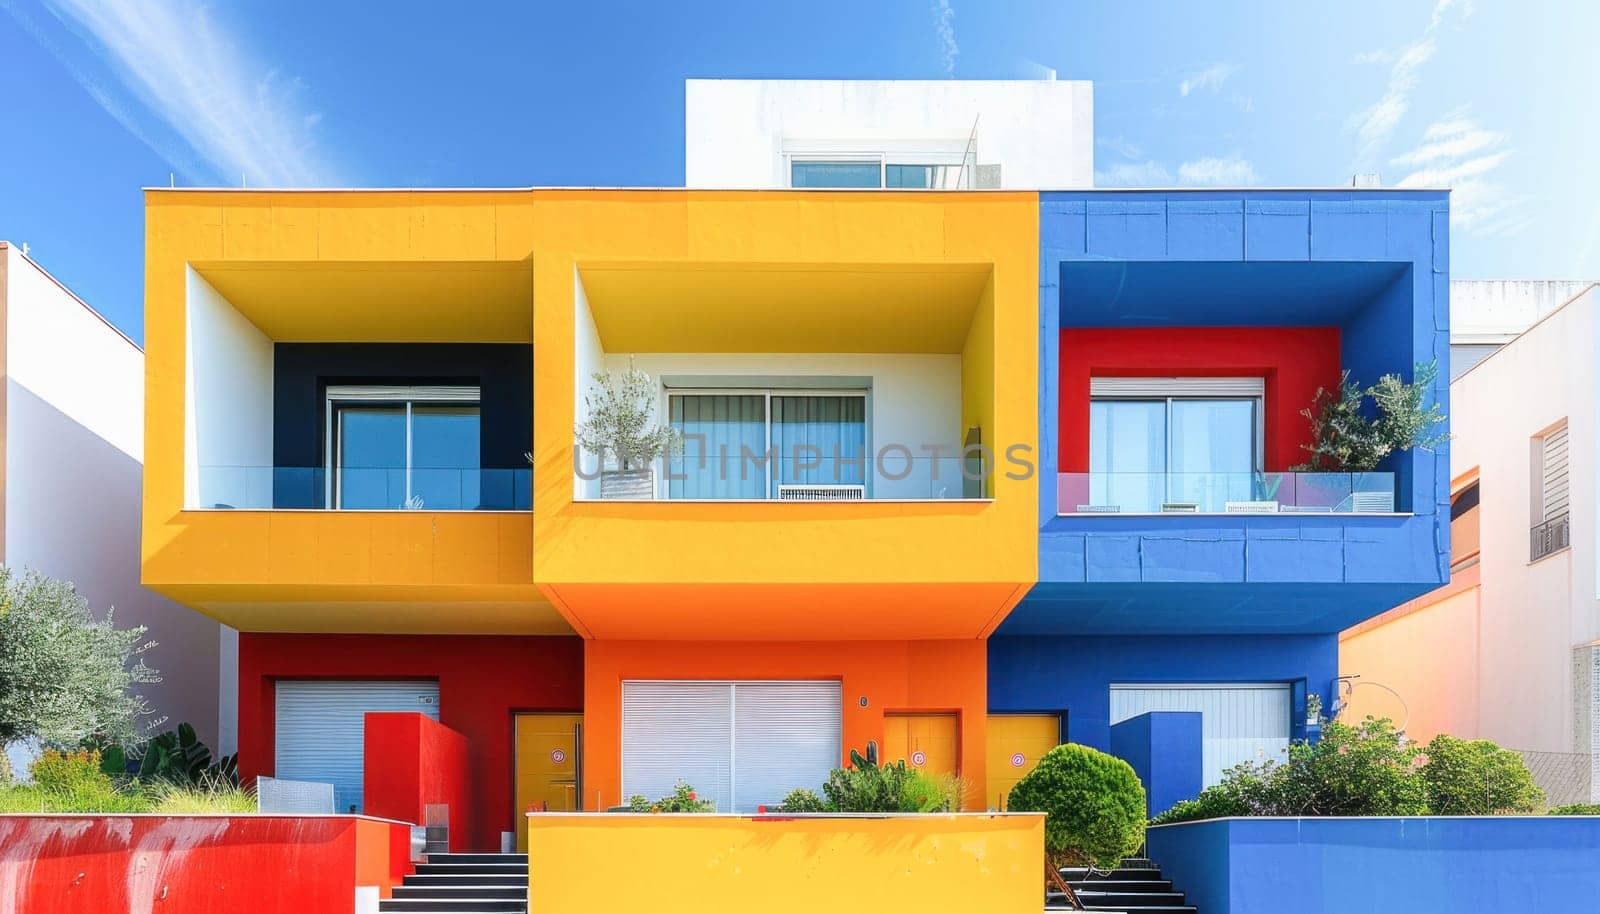 The house is picturesque with vivid yellow, red, and blue walls, and lovely balconies that add to its charm